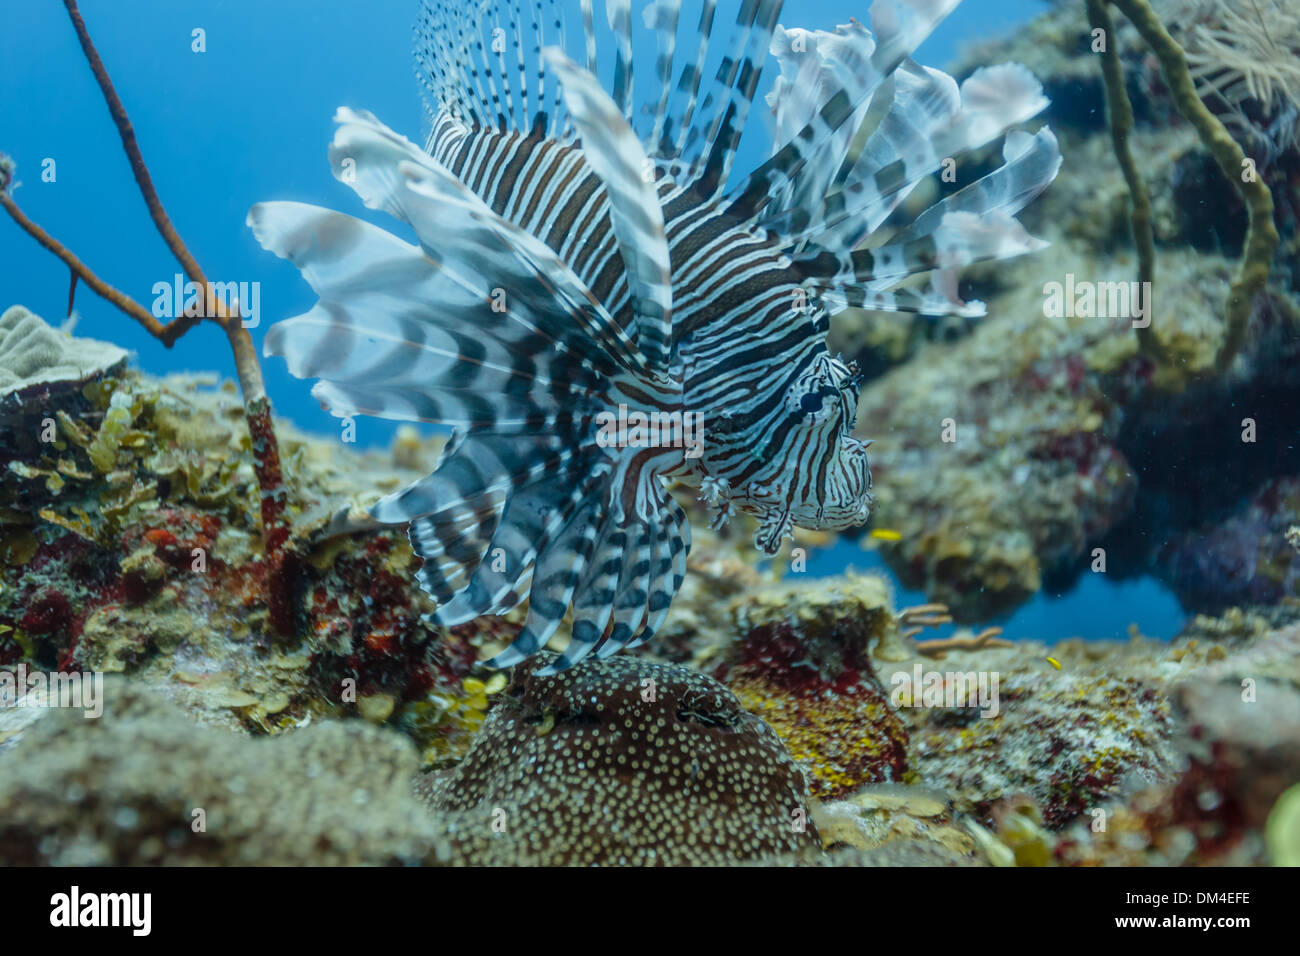 Lionfish displays full array of tentacles on coral reef Stock Photo